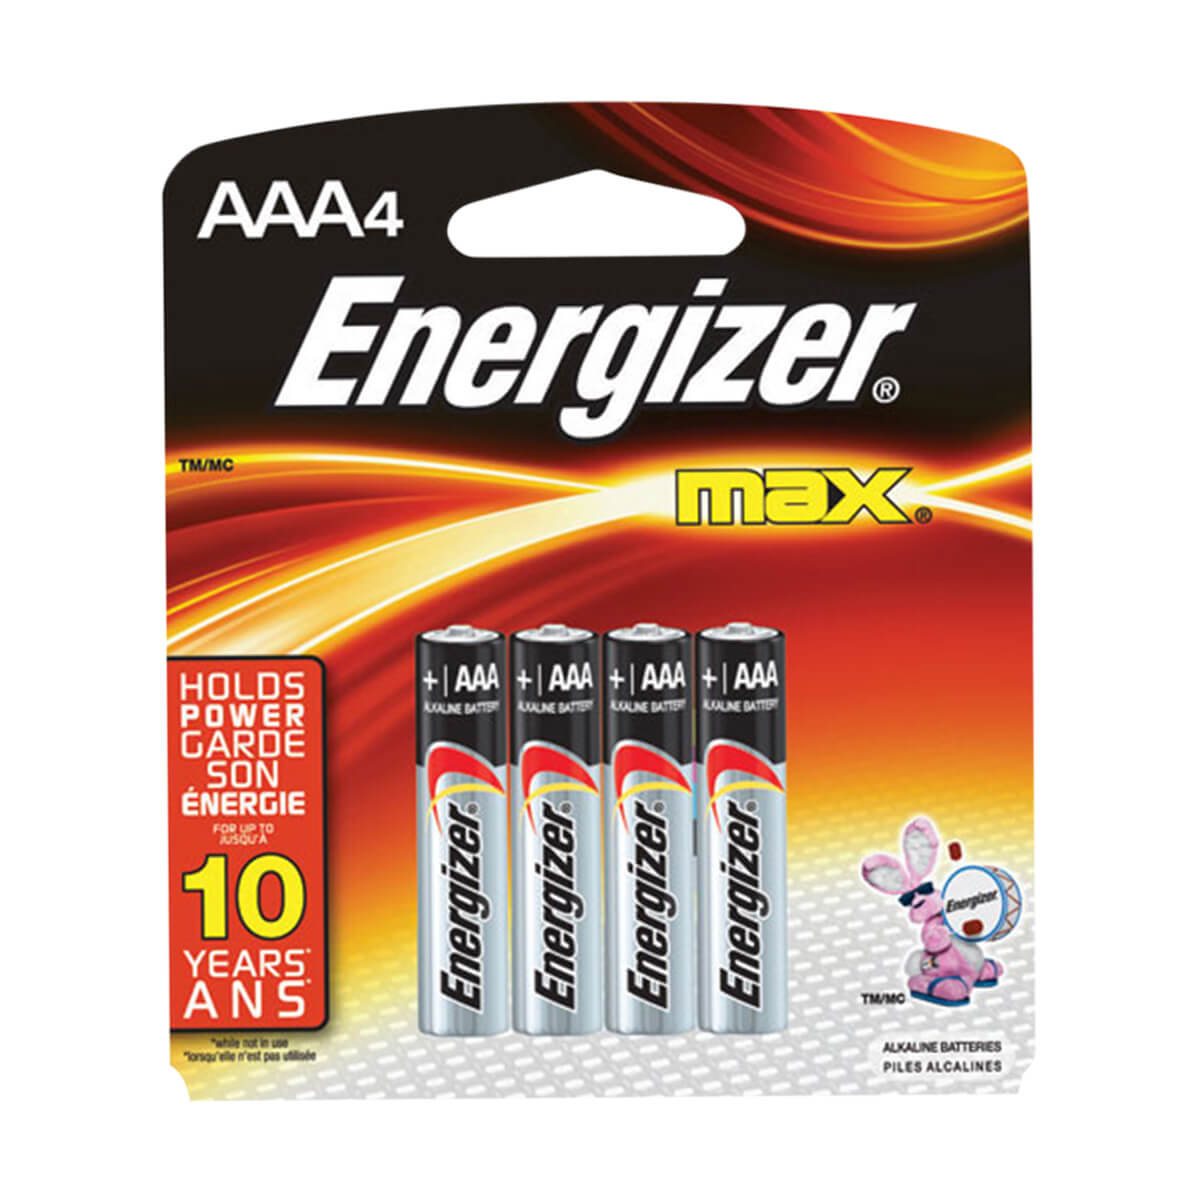 Energizer® AAA Batteries - 4 Pack